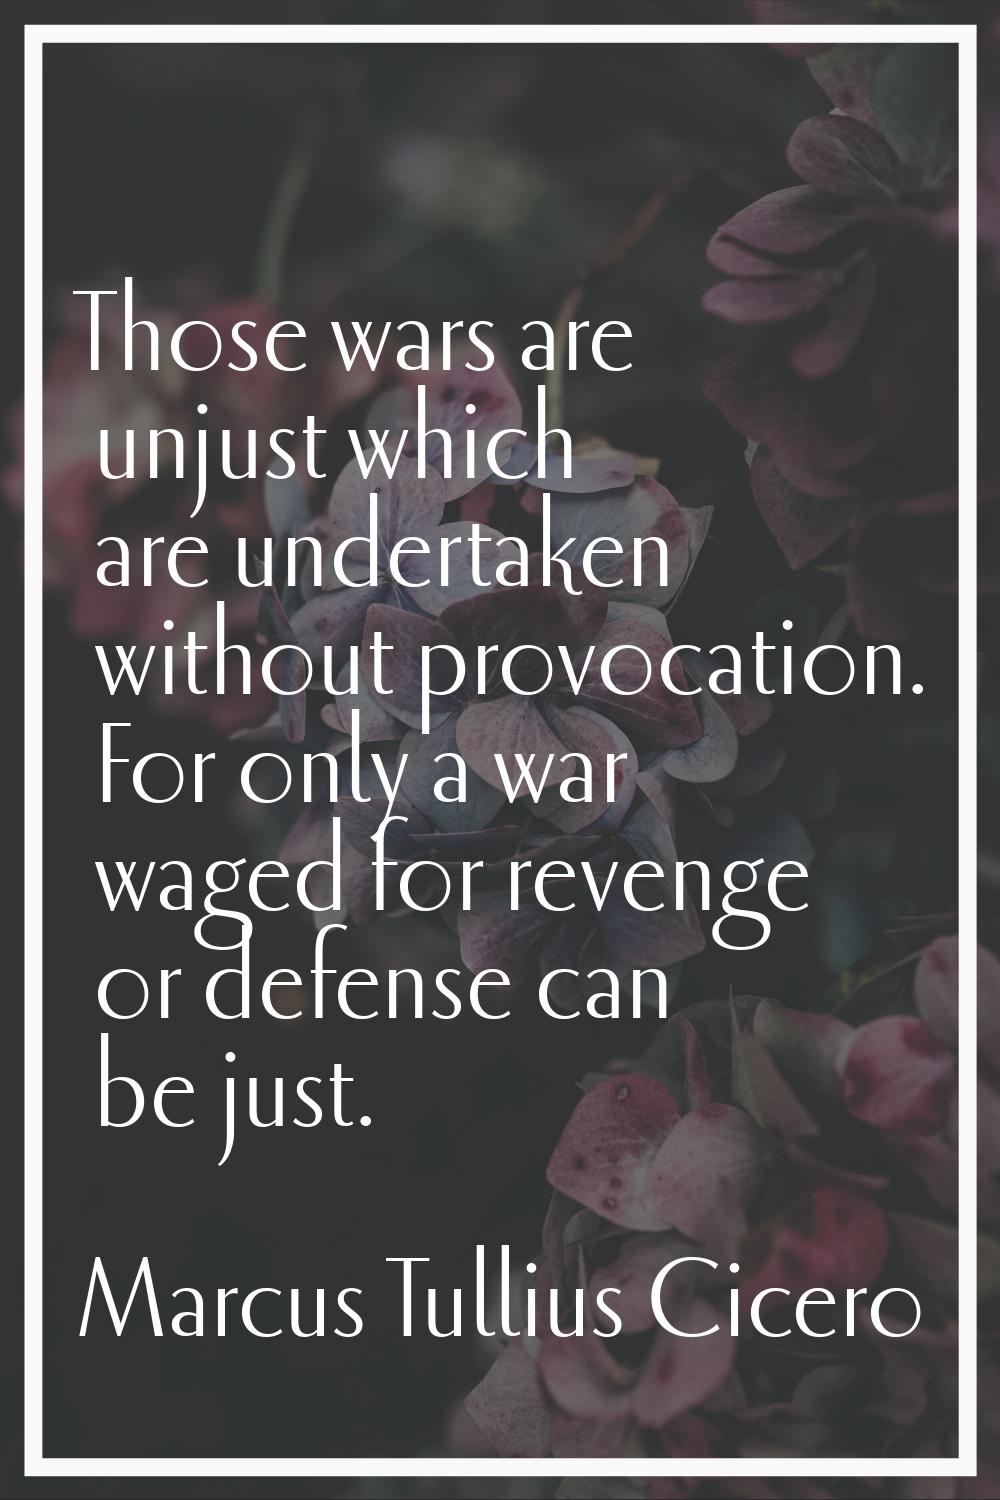 Those wars are unjust which are undertaken without provocation. For only a war waged for revenge or